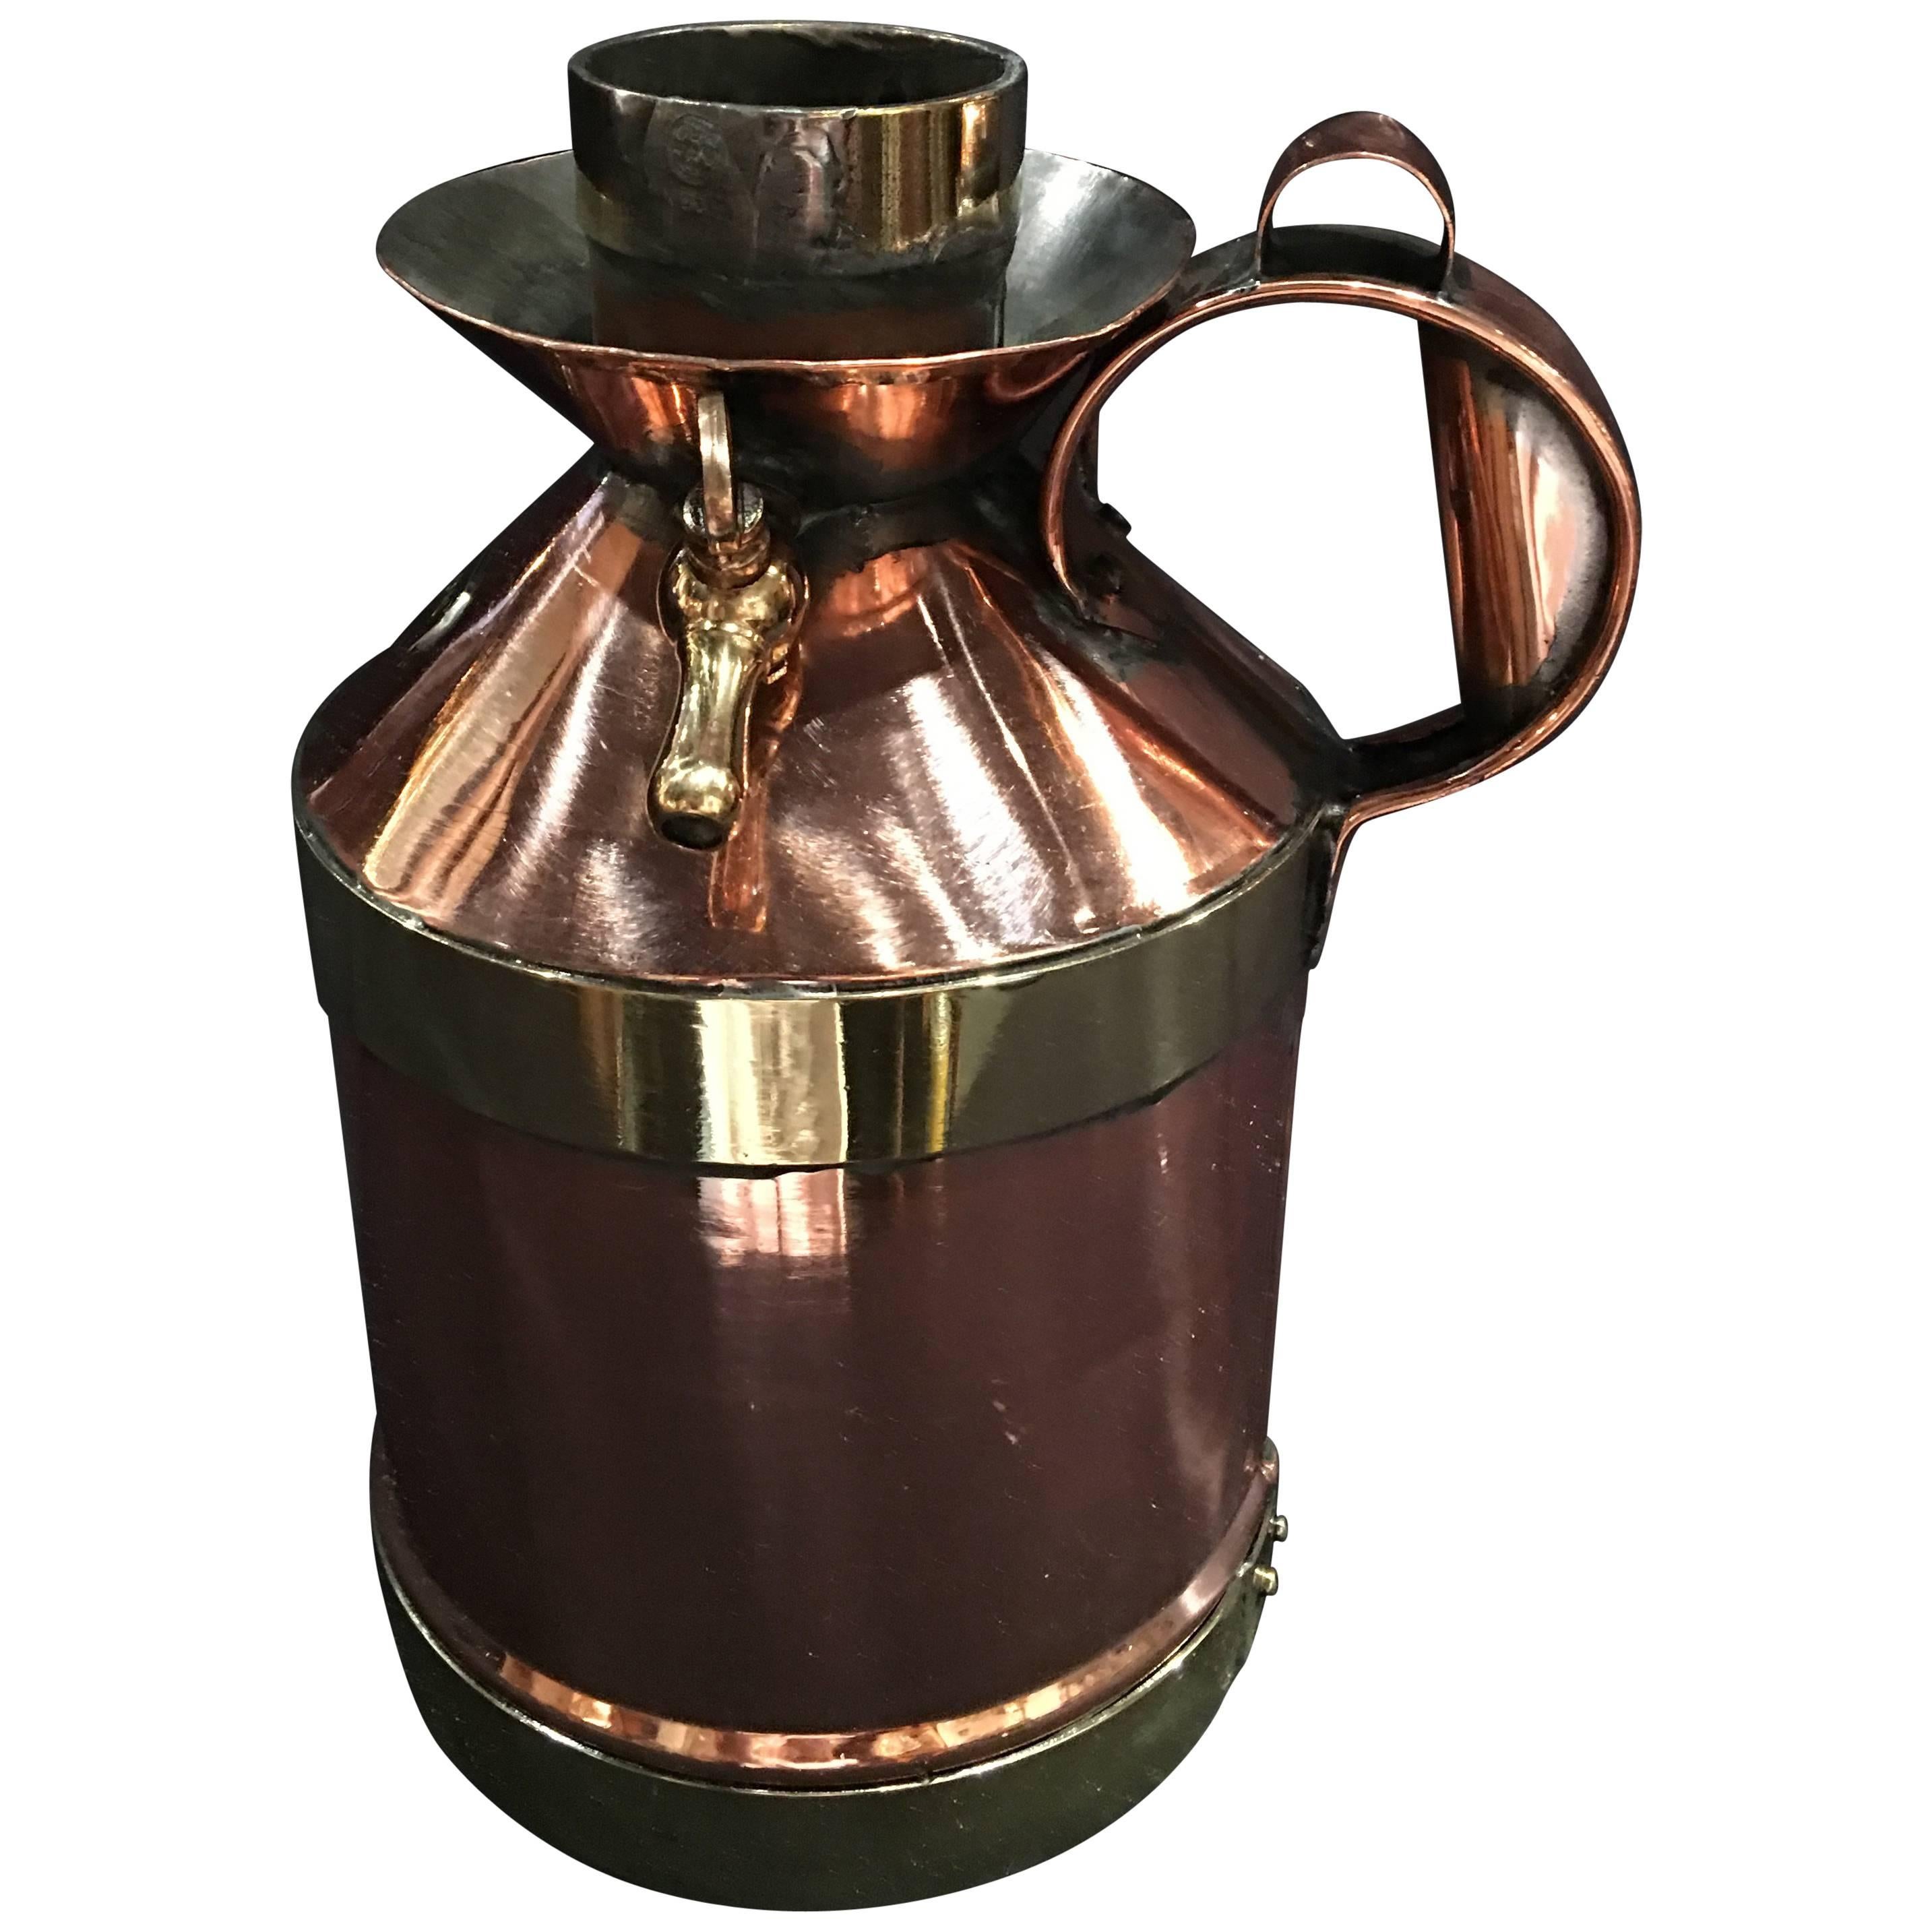 French Polished Copper and Brass 1/2 Gallon Jug or Pitcher, 19th Century